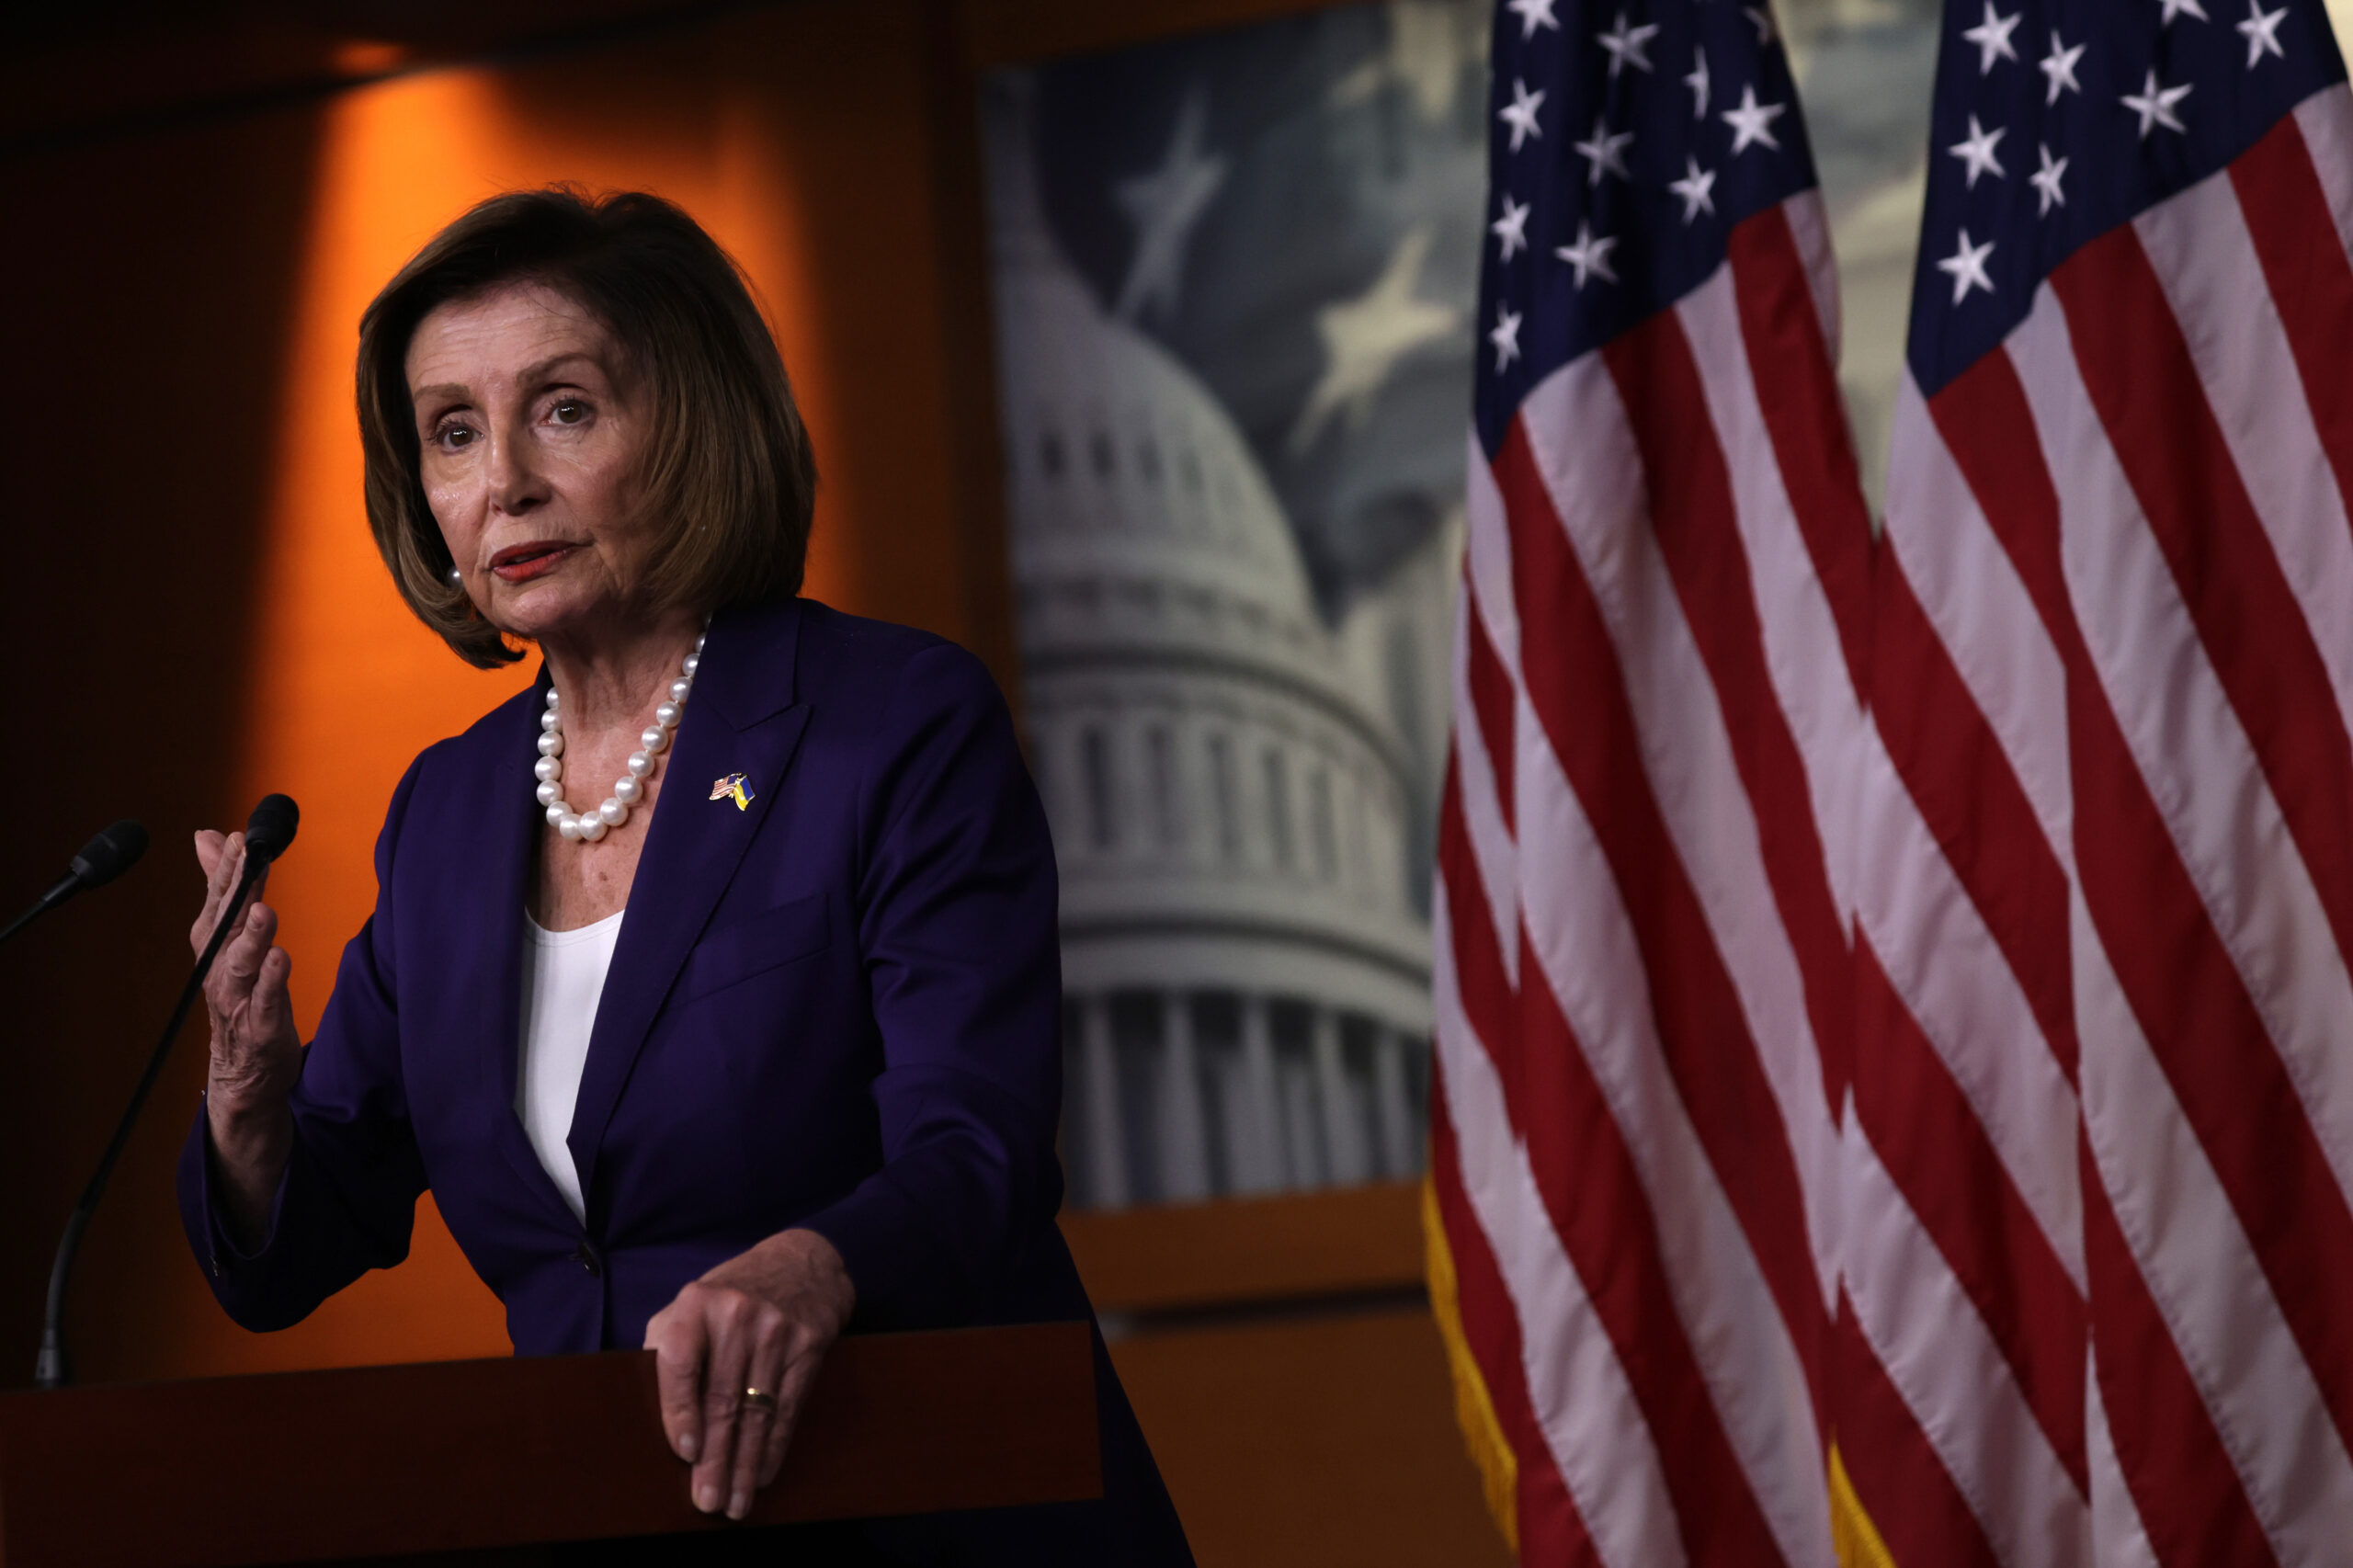 Pelosi Says She’ll Decide on House Leadership Role After Midterms Settled